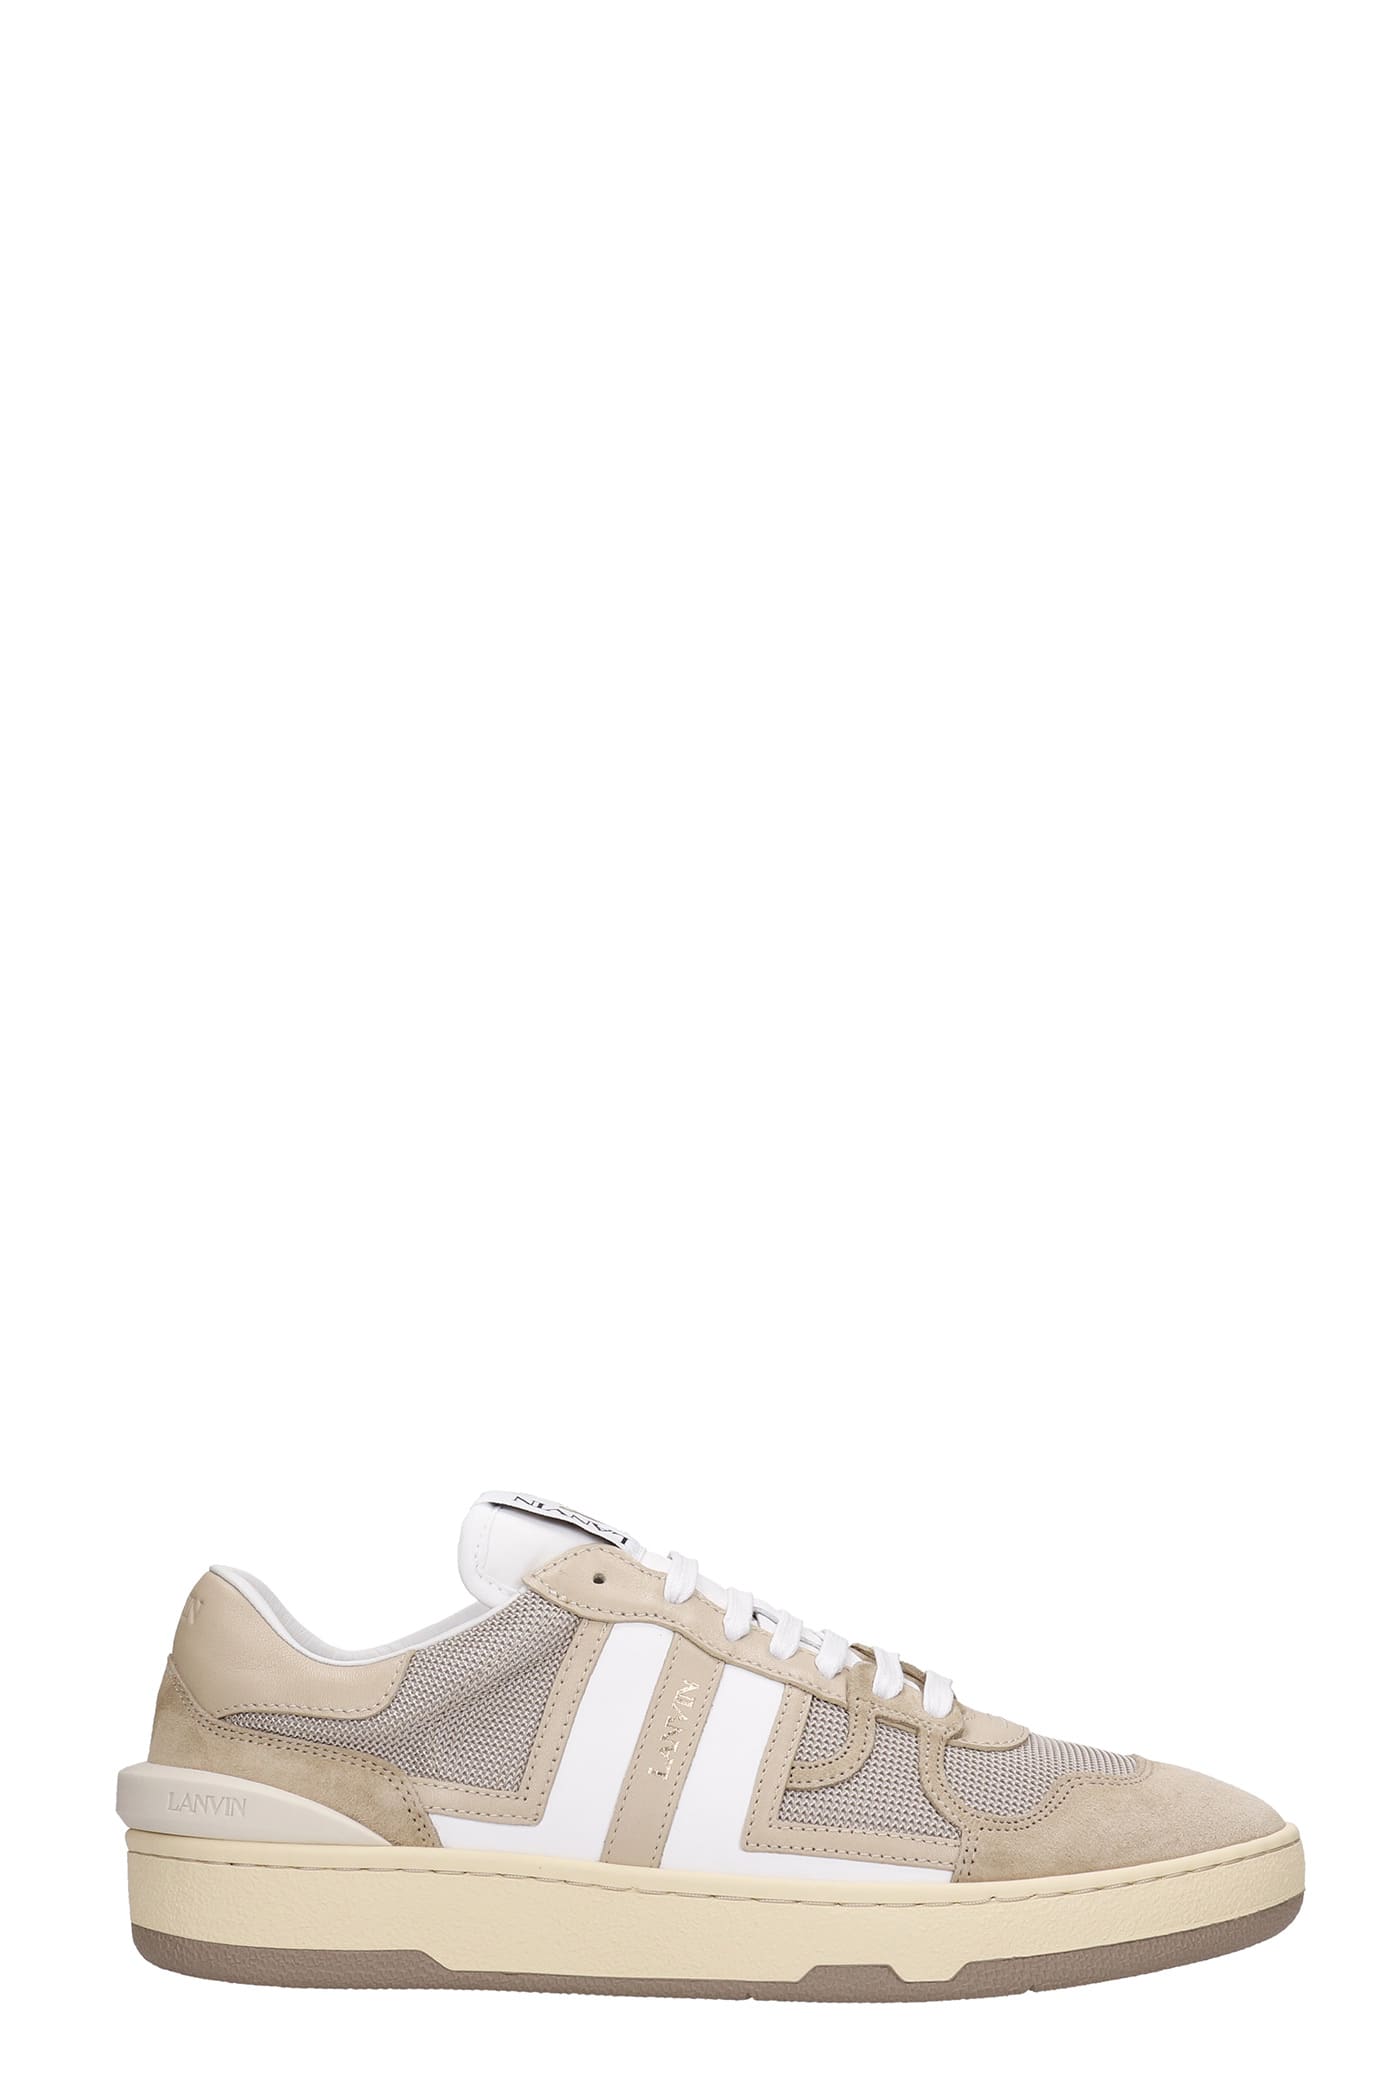 Lanvin Clay Sneakers In Beige Suede And Leather